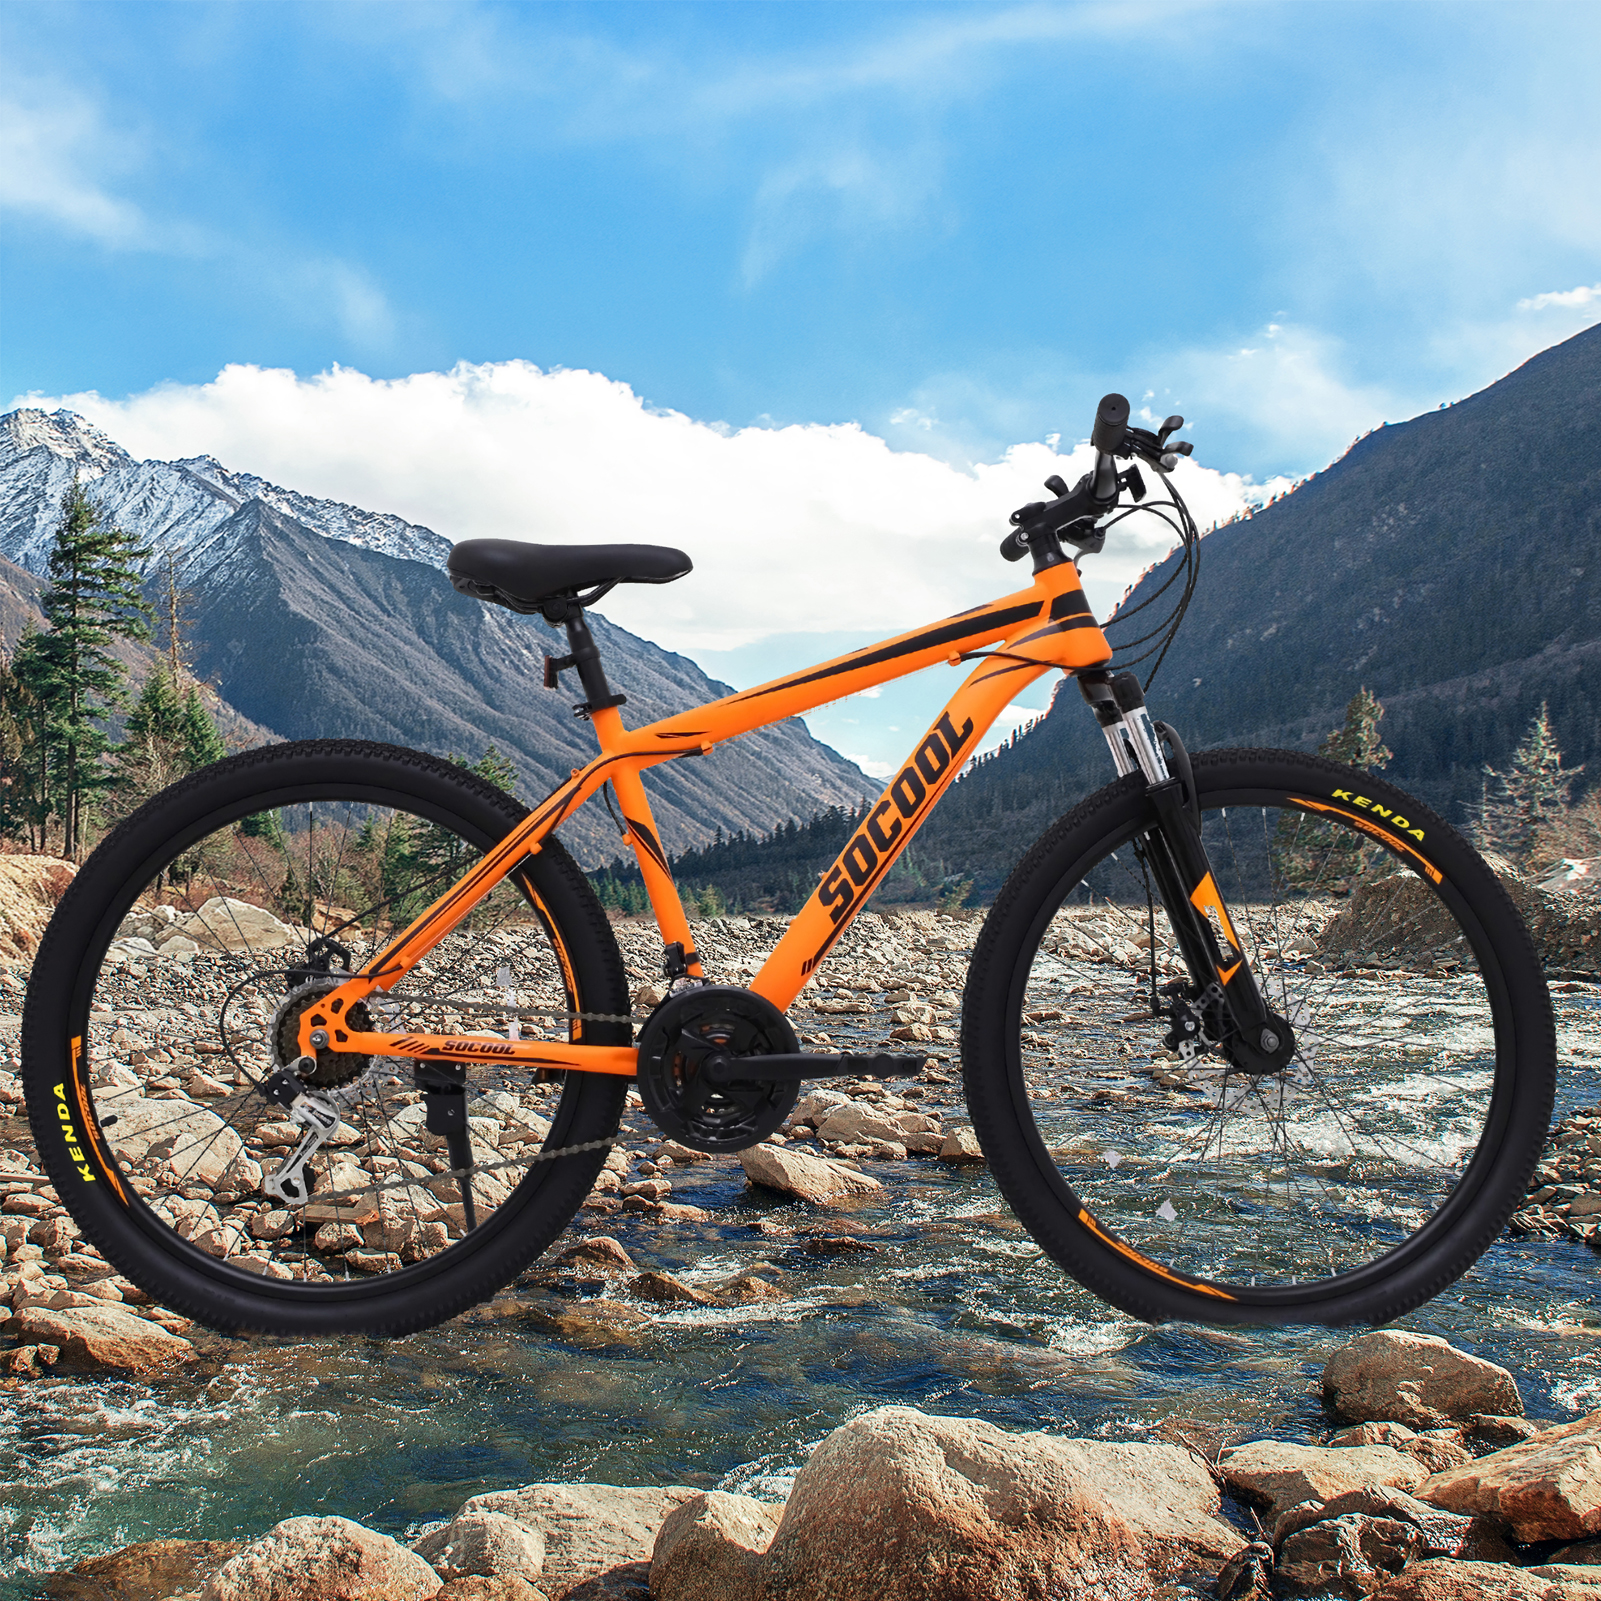 SOCOOL Mountain Bikes with 26-Inch Wheels, Aluminum Frame and Pedals, 26" Bike for Adults and Youth, Shimano Parts, 21 Speed Mountain Bicycle -Orange & Black, LO229BK - image 2 of 9